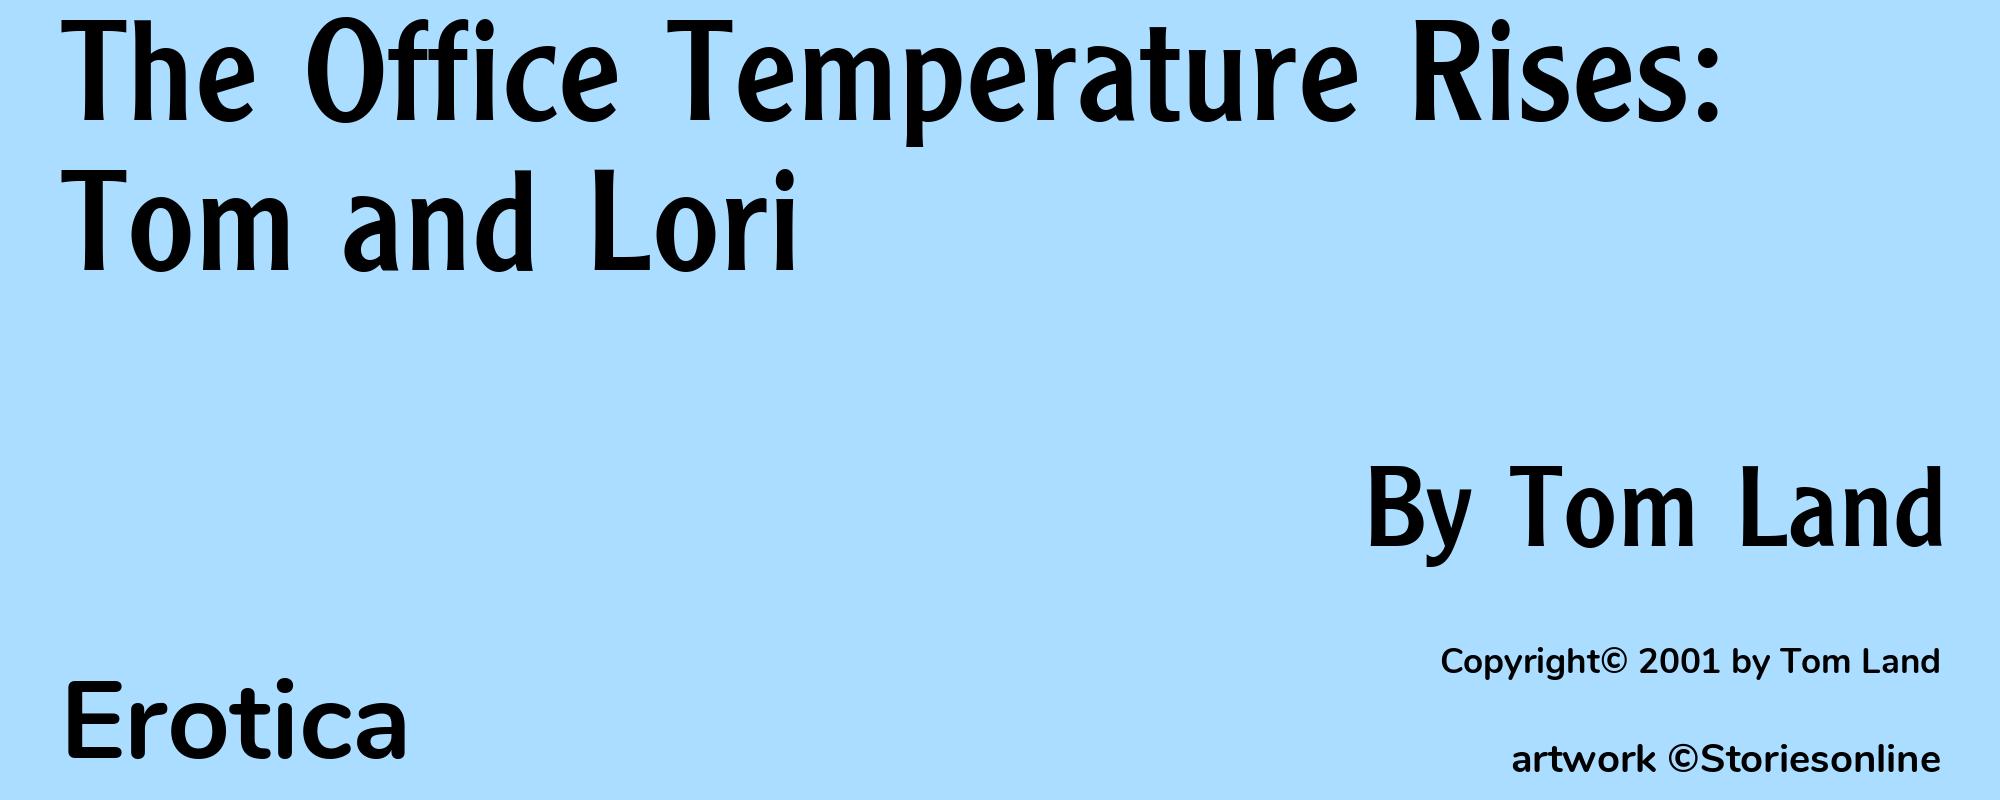 The Office Temperature Rises: Tom and Lori - Cover